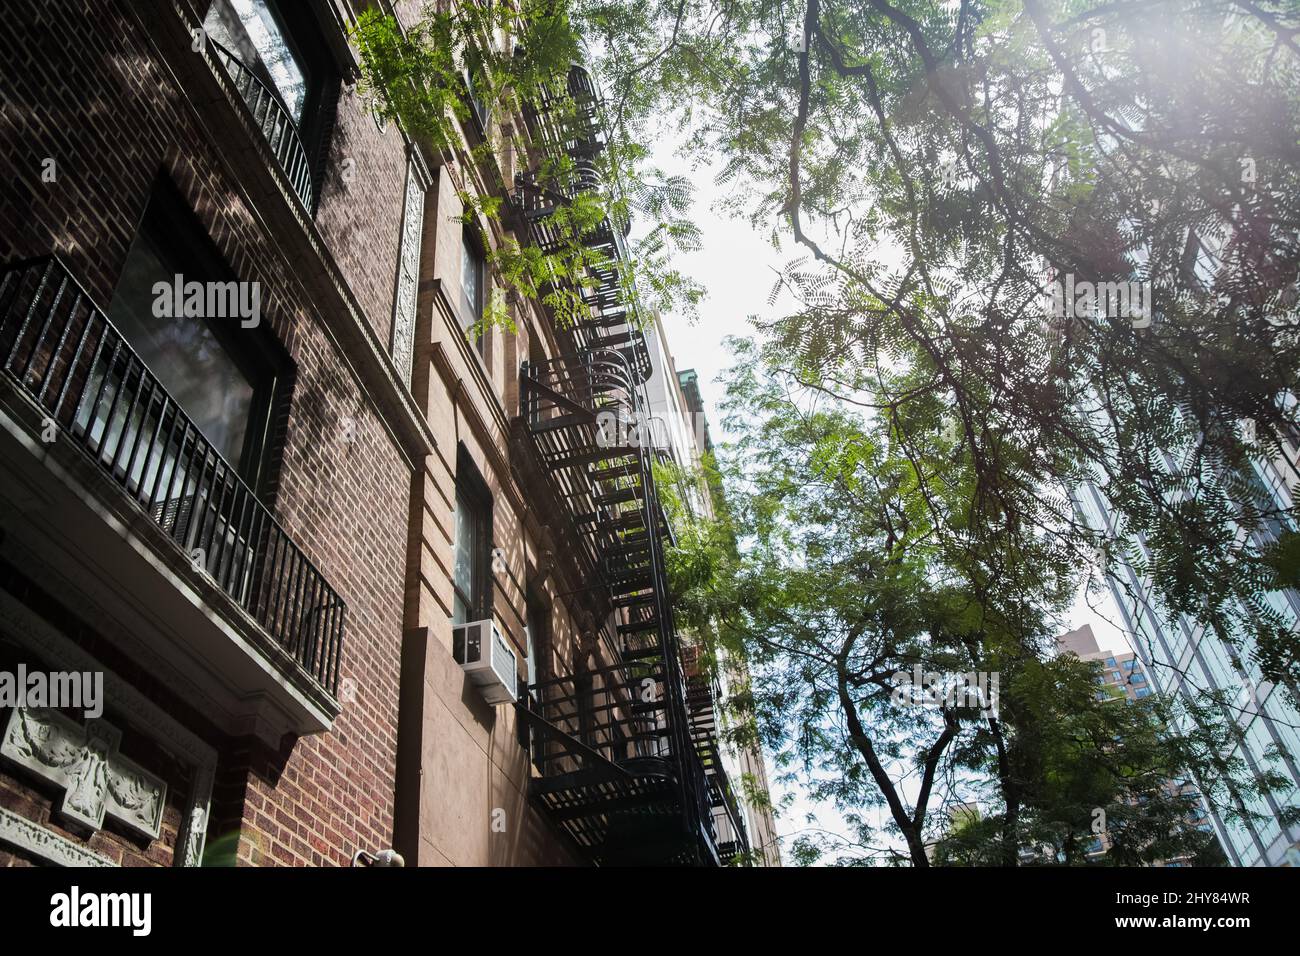 Brick buildings and street trees in Manhattan Stock Photo